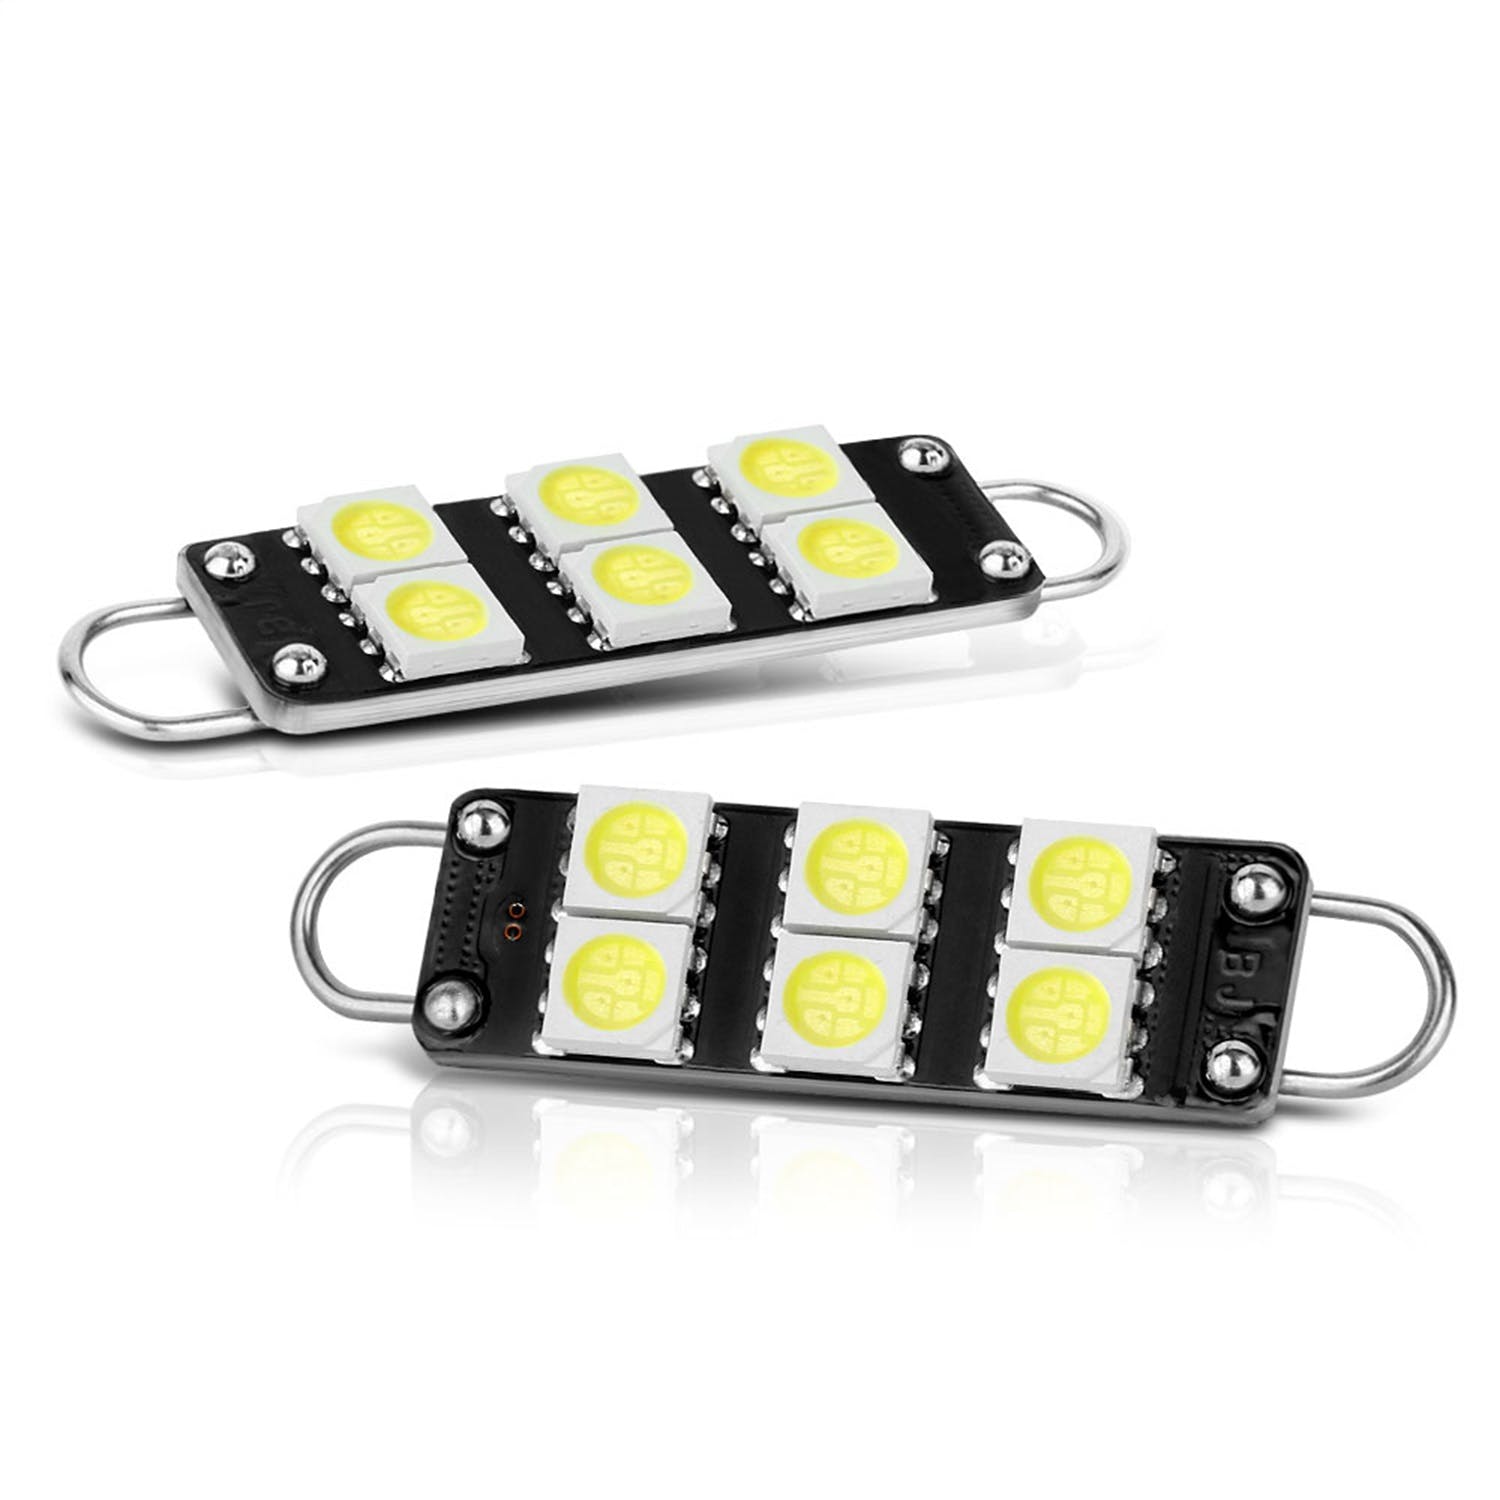 XTUNE POWER 9044908 IDENTICAL OEM SIZE 8 x 5050 LED Chip Machine Soldered Into Each Bulb White Color White 5500K 1 Pair Rigid Loop Festoon